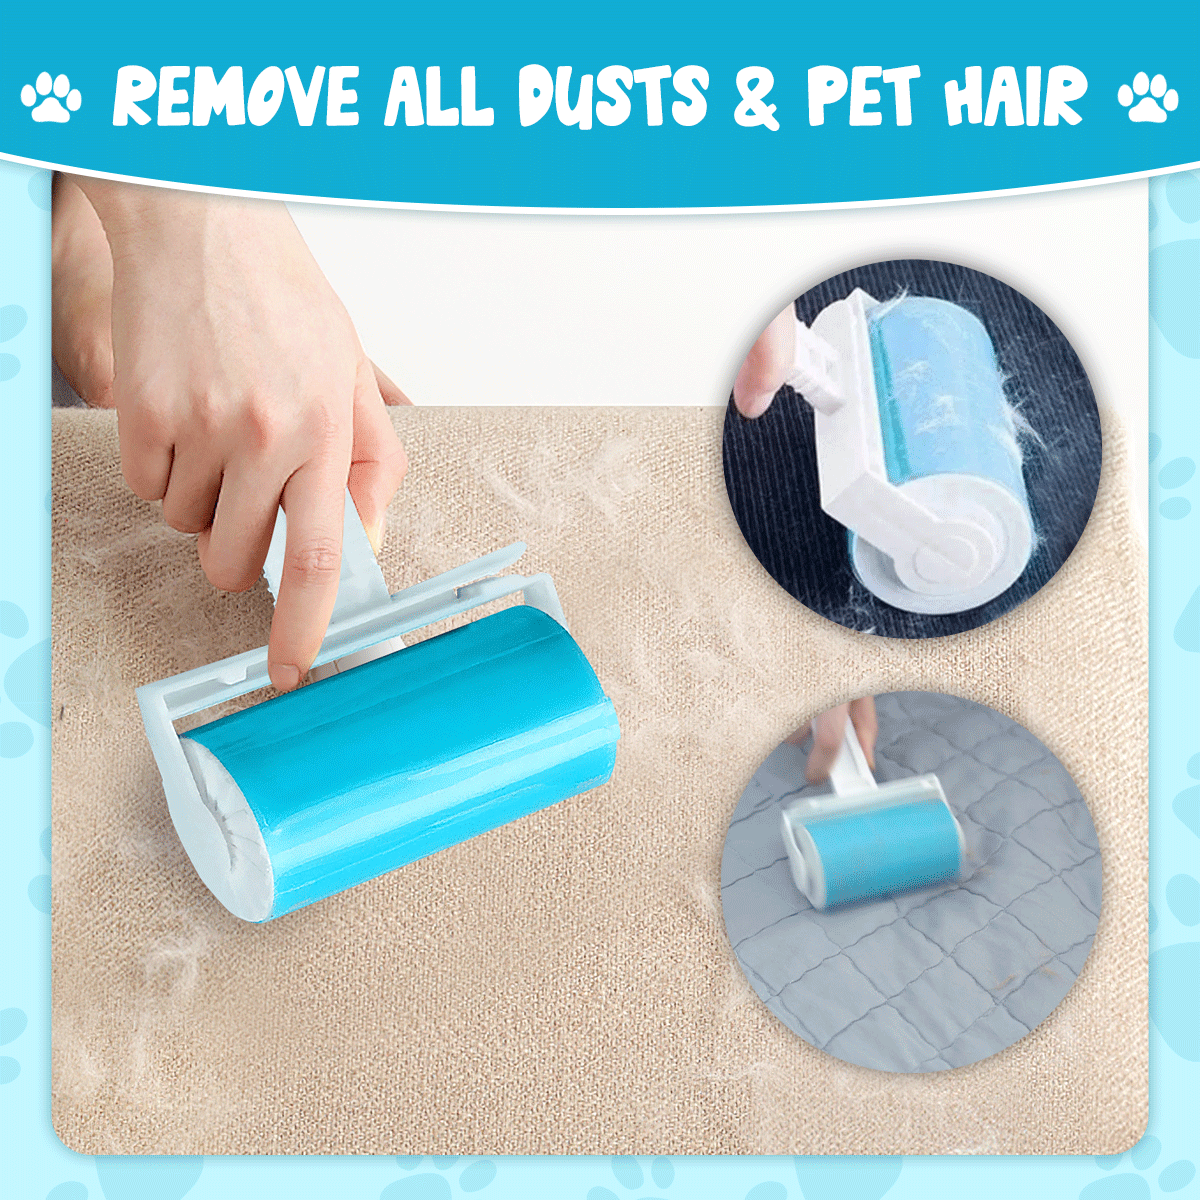 Washable Reusable Lint Roller, Lint Remover, Dust Wiper, Pet Hair Remover, Sticky Roller